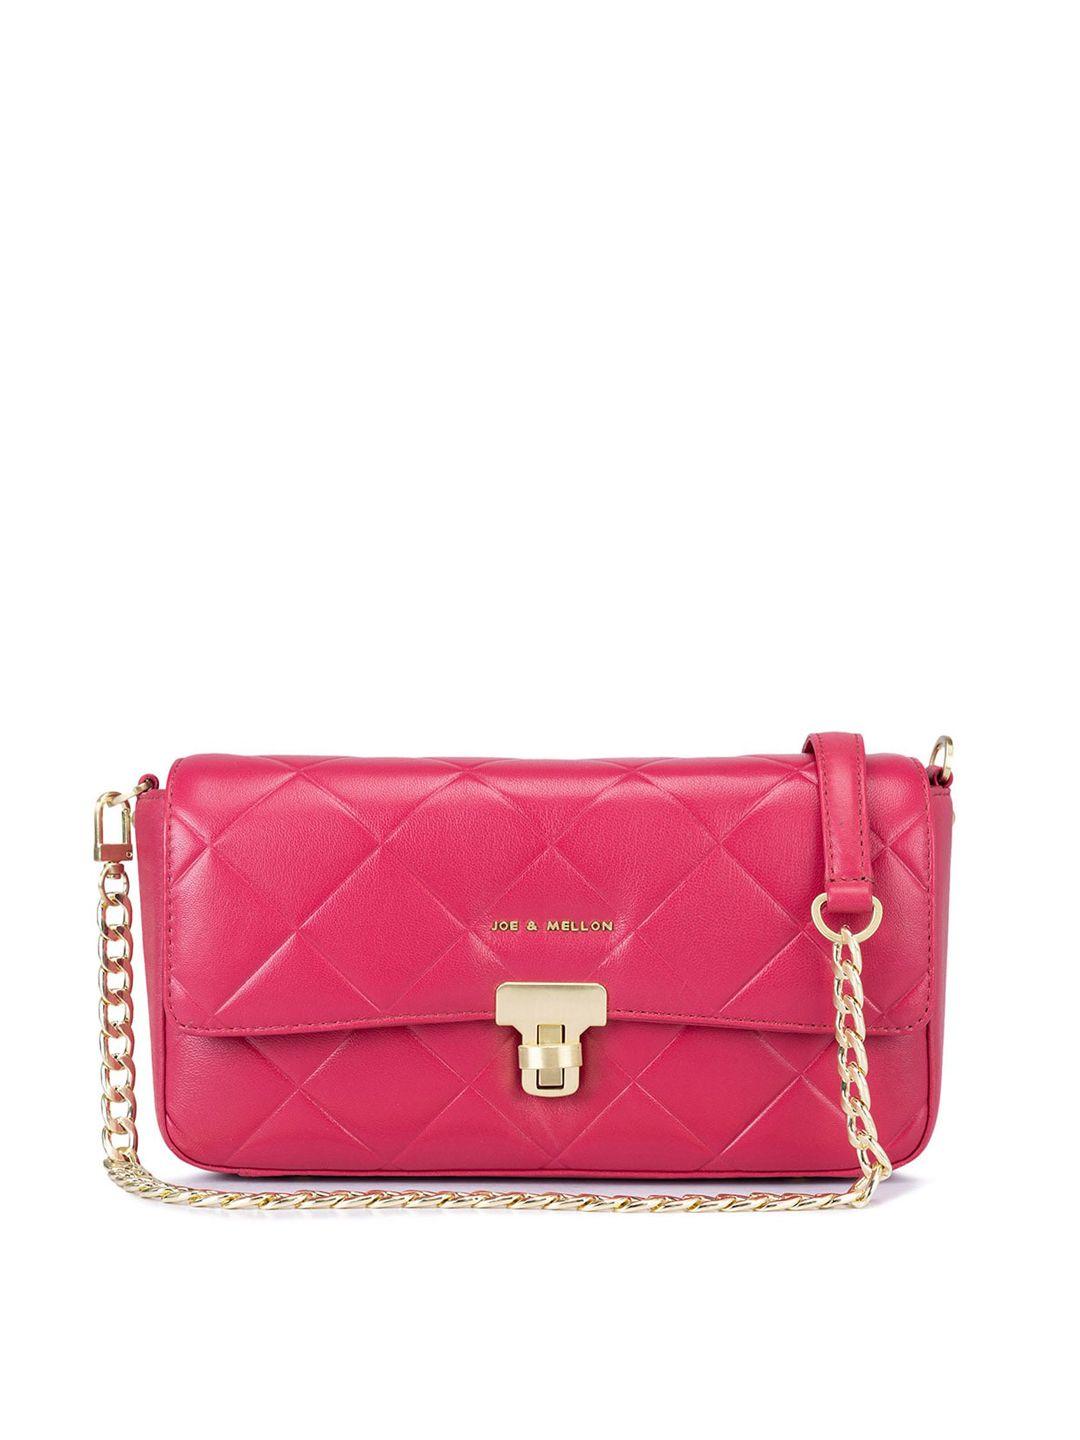 joe & mellon textured leather structured sling bag